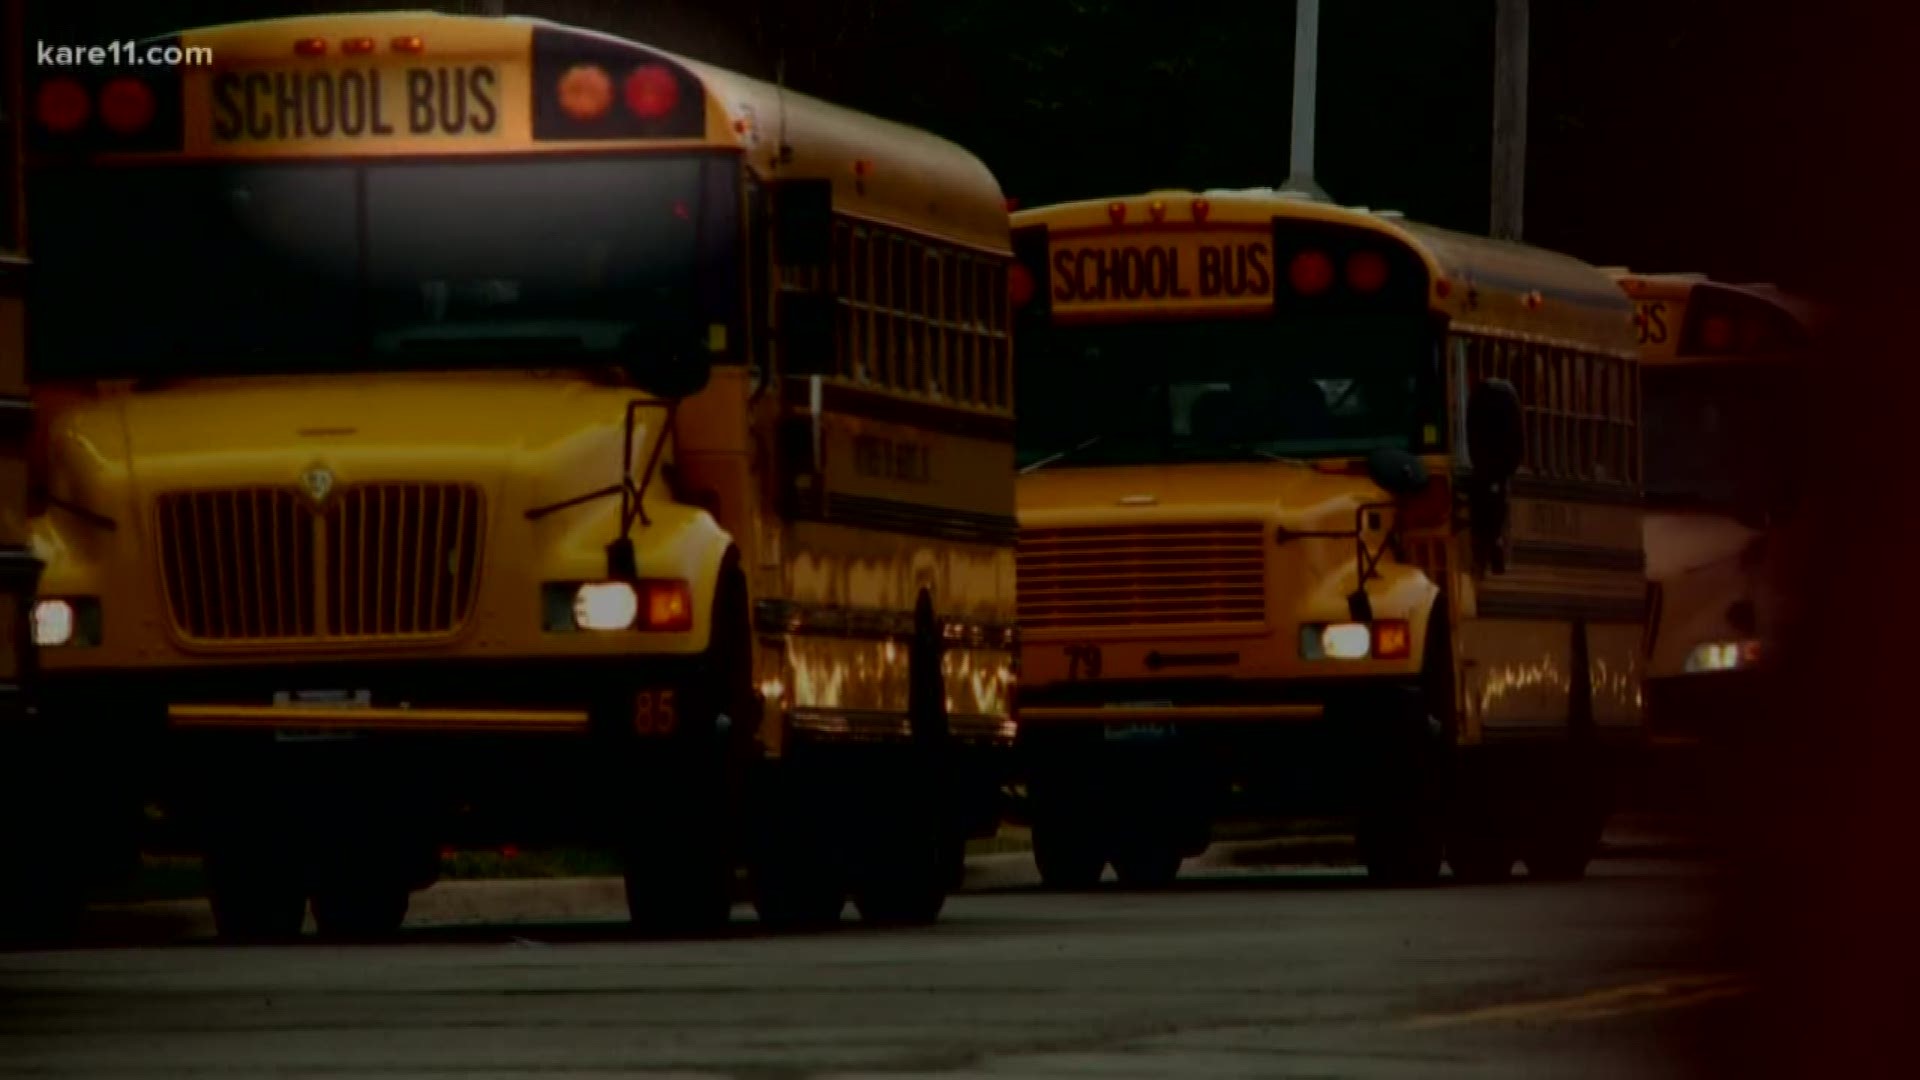 A KARE 11 investigation finds that state leaders still have not closed loopholes in the law that let admitted child molesters drive school buses. https://kare11.tv/2KJxY7s